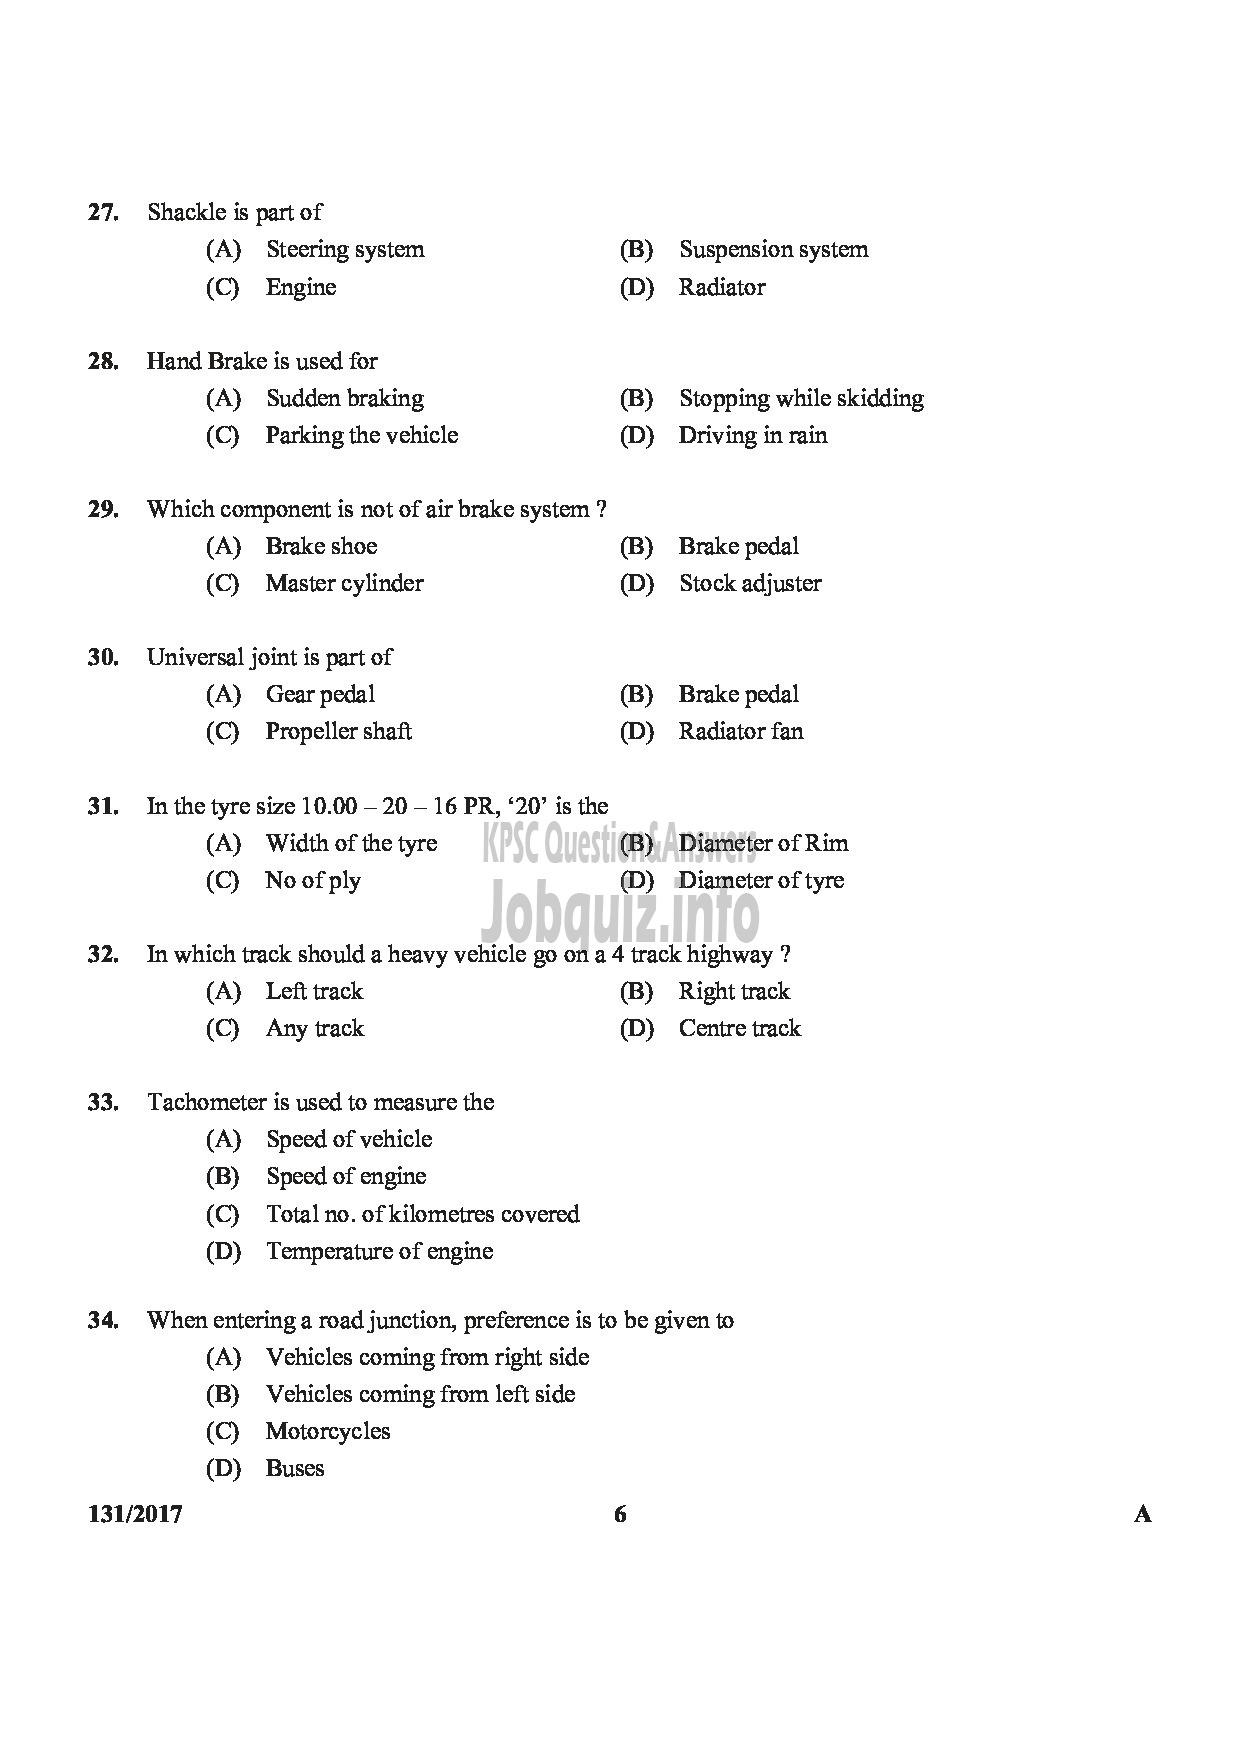 Kerala PSC Question Paper - FIREMAN DRIVER CUM PUMP OPERATOR TRAINEE SR FROM AMONG SC/ST ONLY FIRE AND RESCUE SERVICE-6